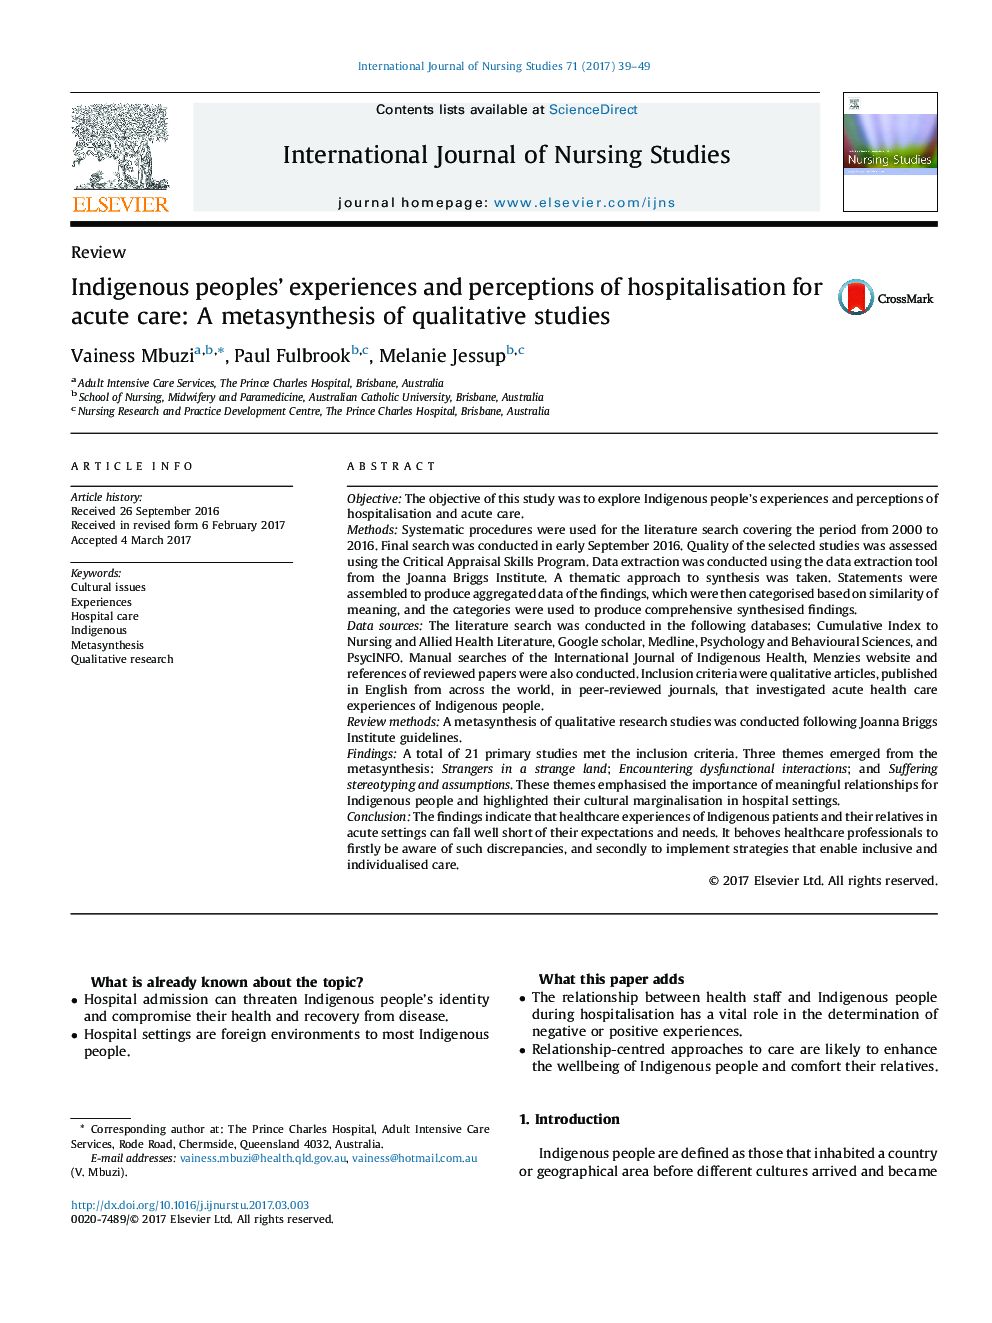 Indigenous peoples' experiences and perceptions of hospitalisation for acute care: A metasynthesis of qualitative studies